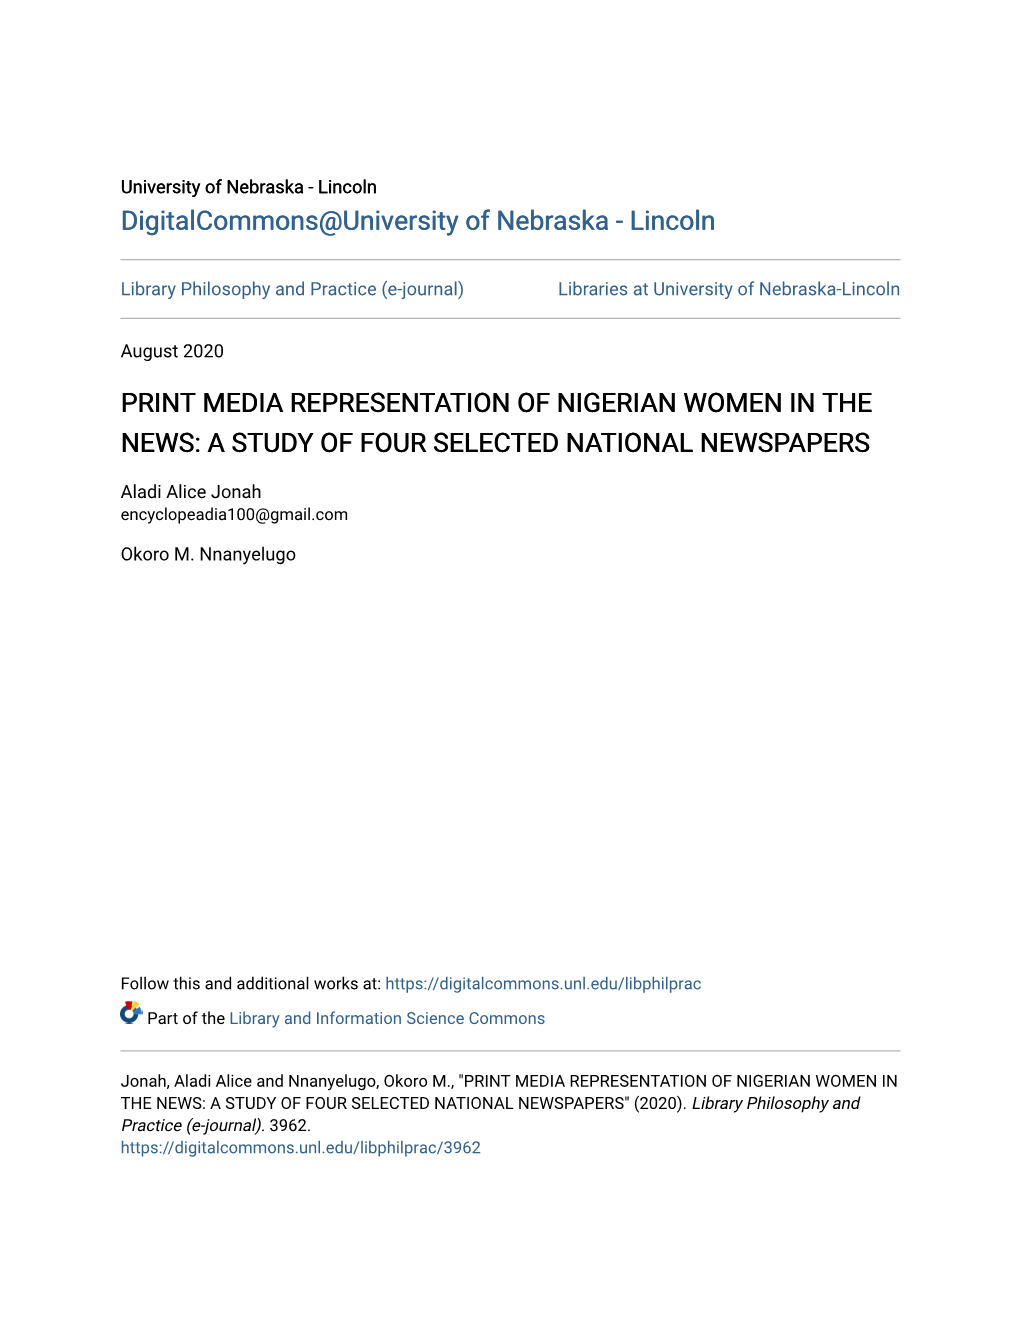 Print Media Representation of Nigerian Women in the News: a Study of Four Selected National Newspapers